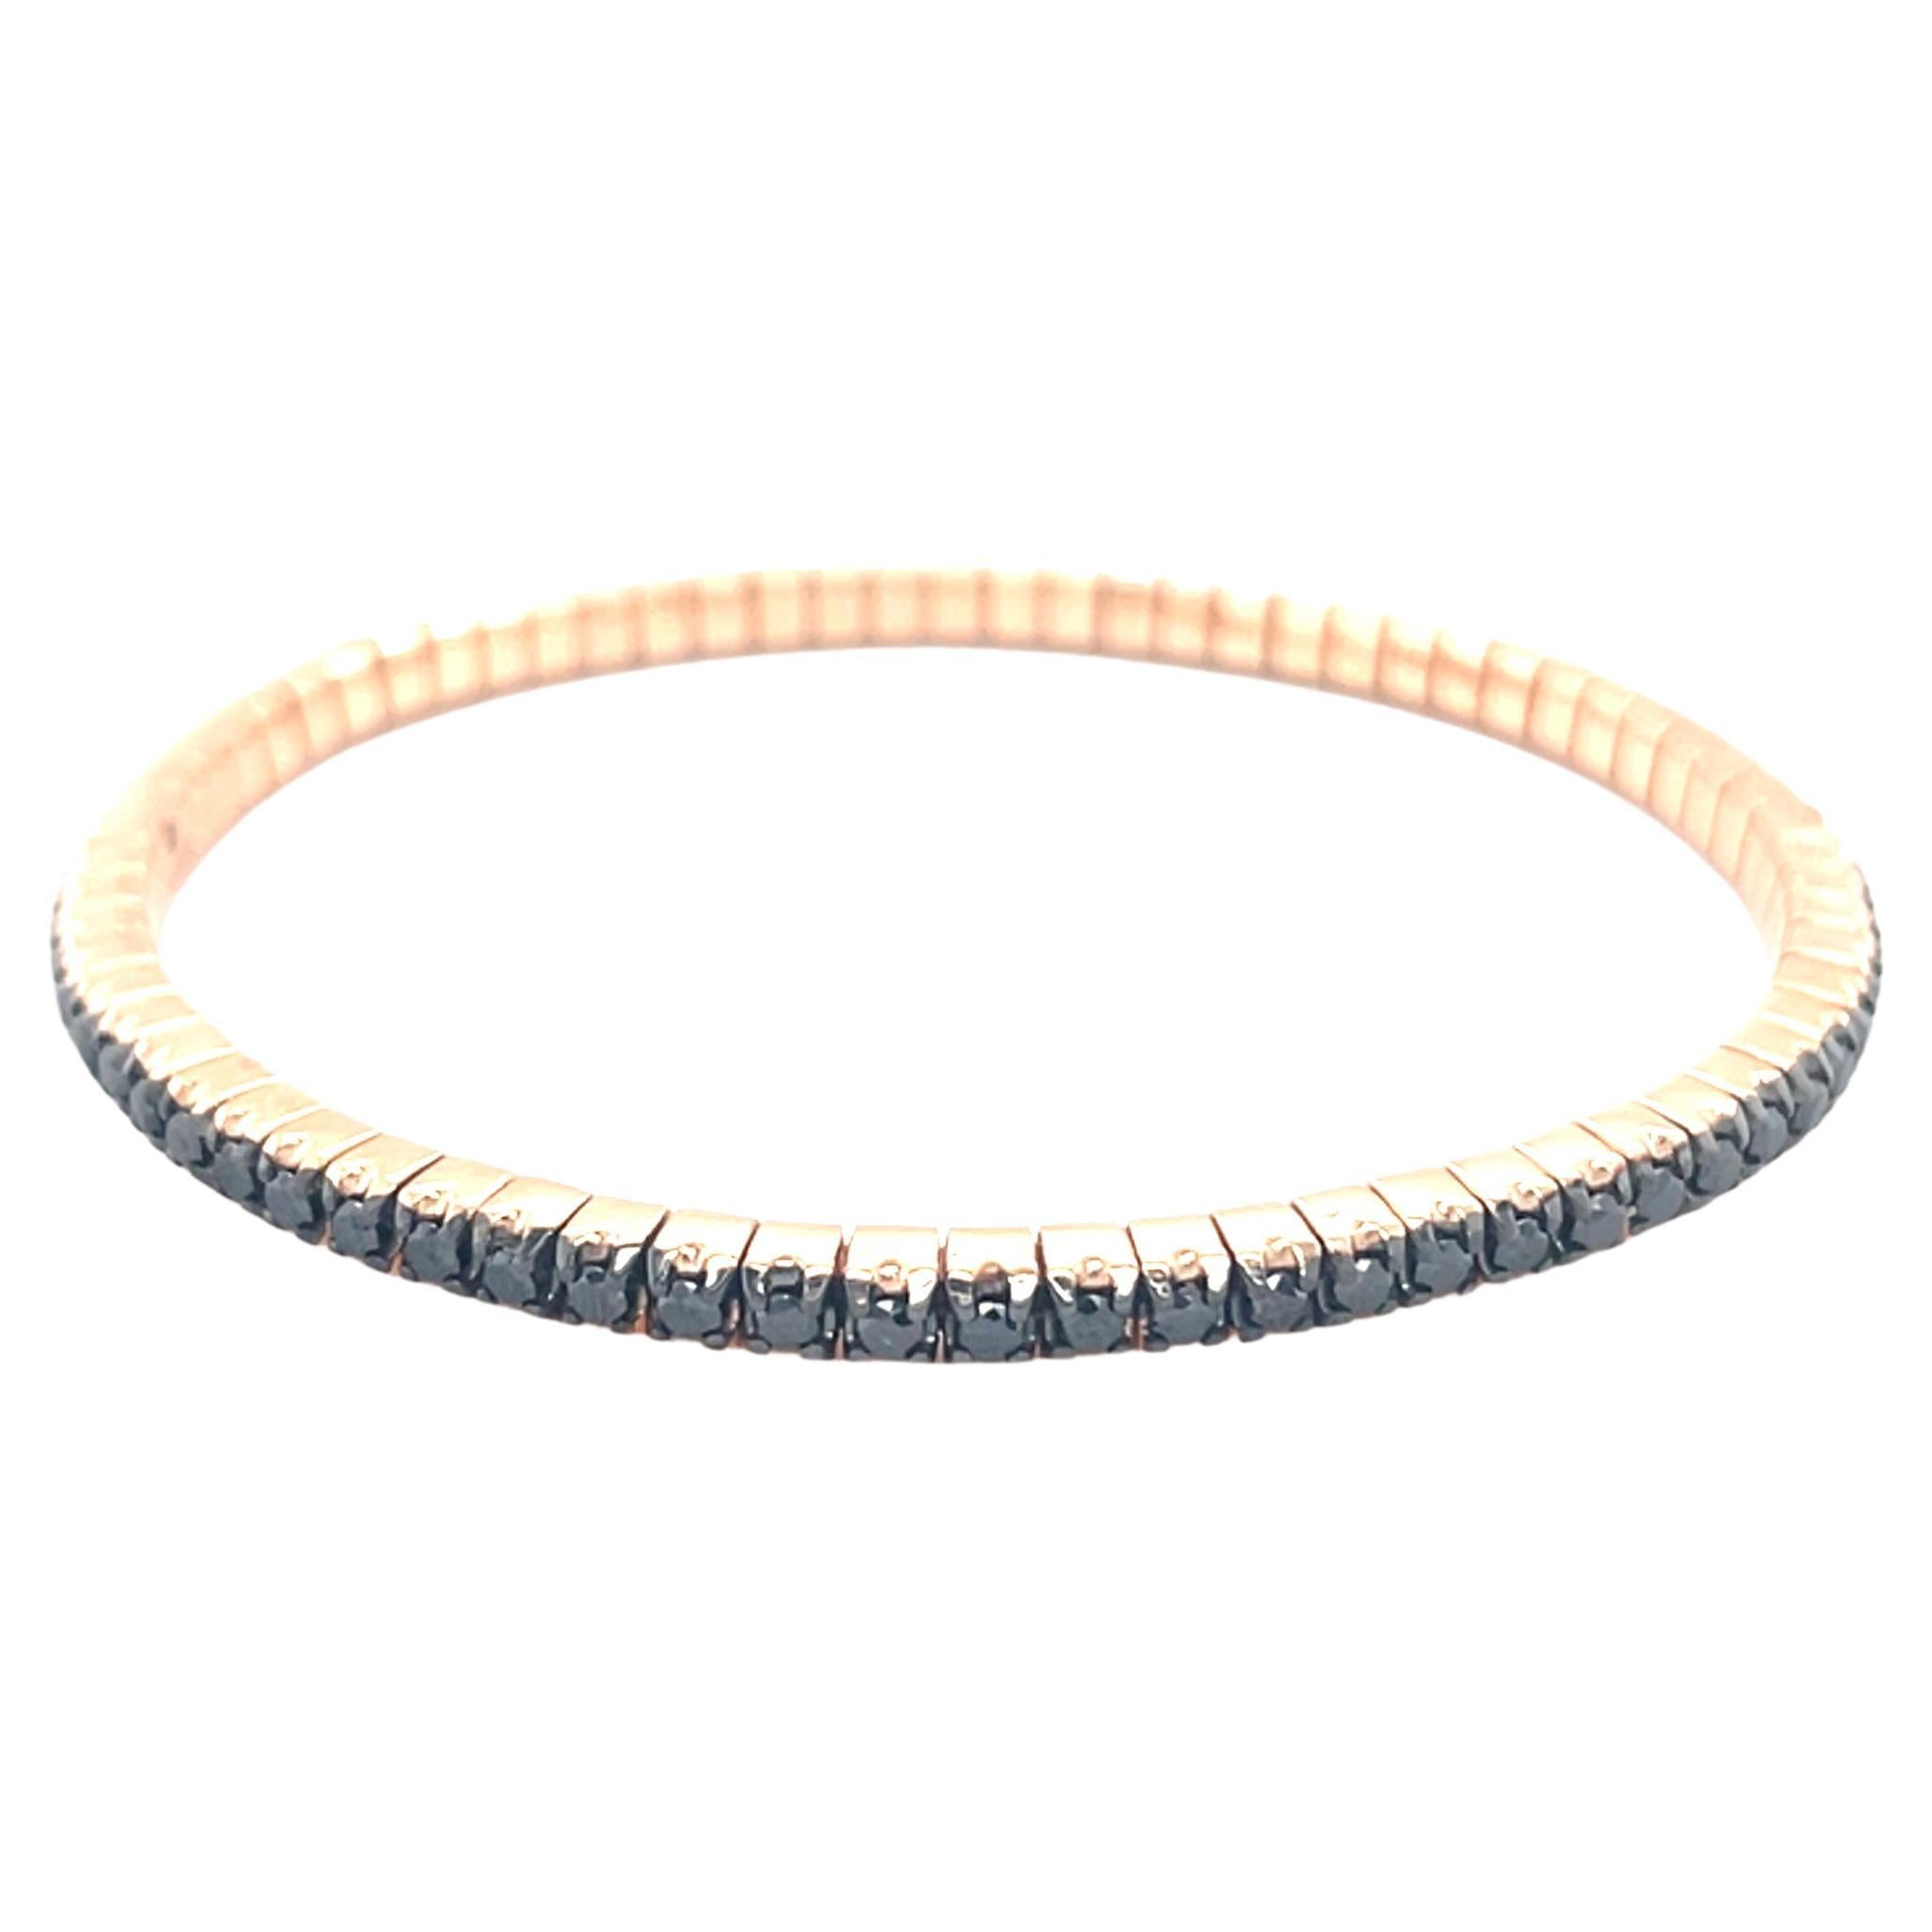 18K rose gold bracelet is from our Men's Collection. This masculine flexible bracelet is made of 71 natural round black diamonds in total of 2.43 Carat placed along the bracelet. The diameter of the bracelet is 6.5cm. Total metal weight is 16.22 gr.